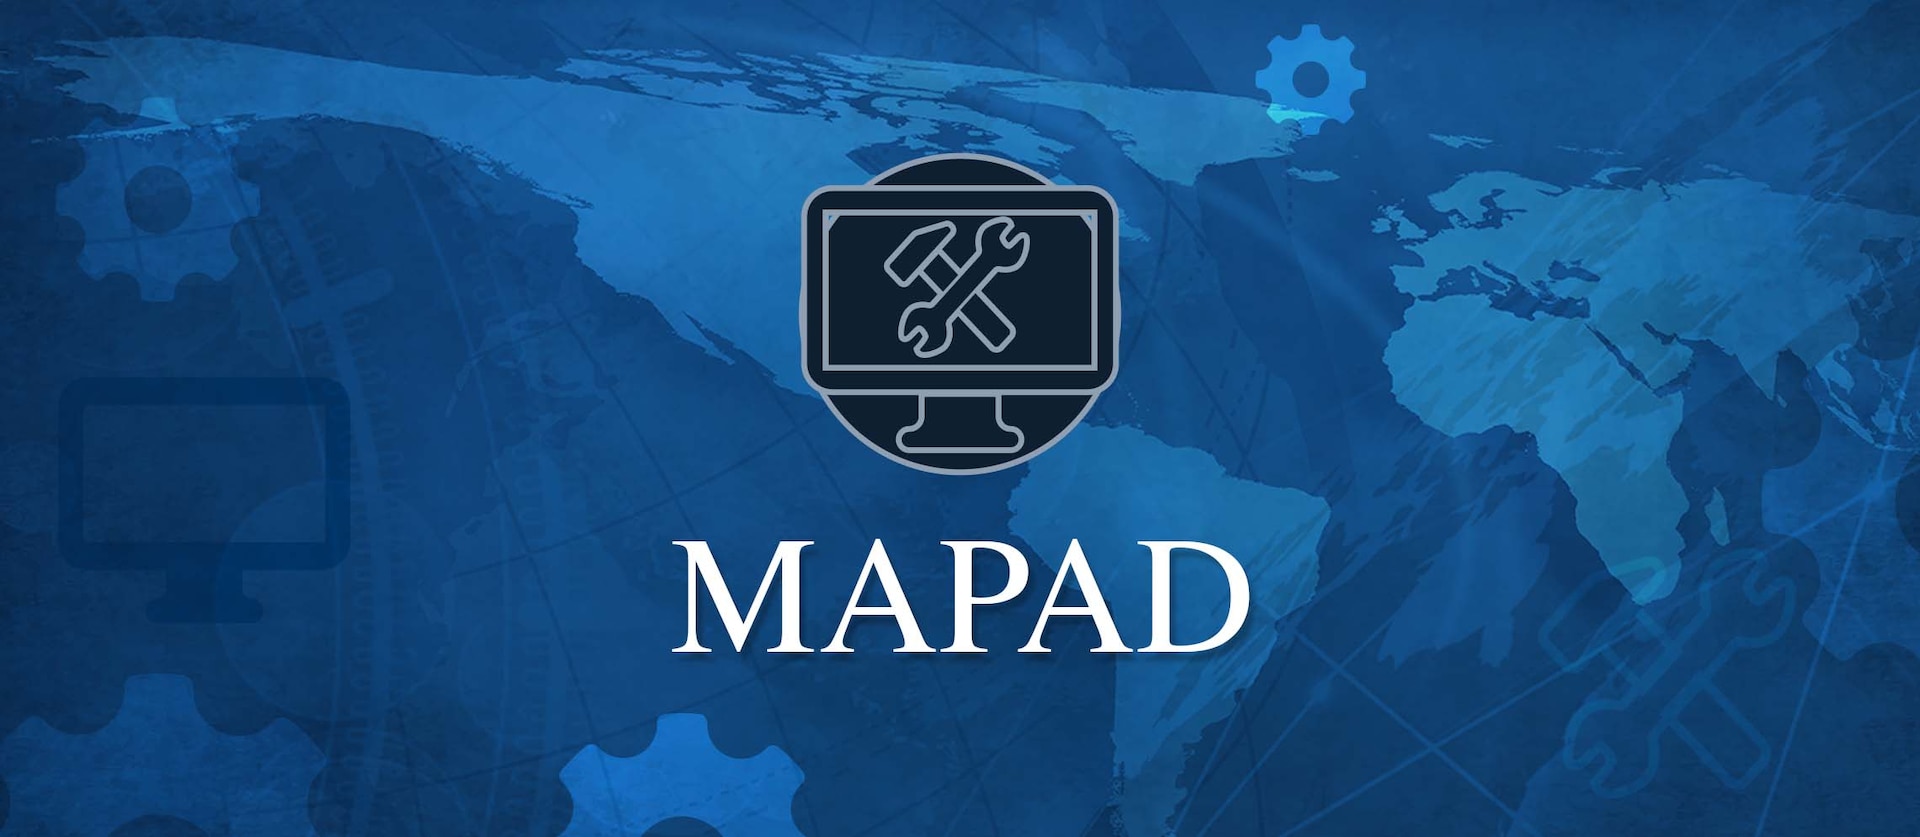 Graphic for MAPAD application